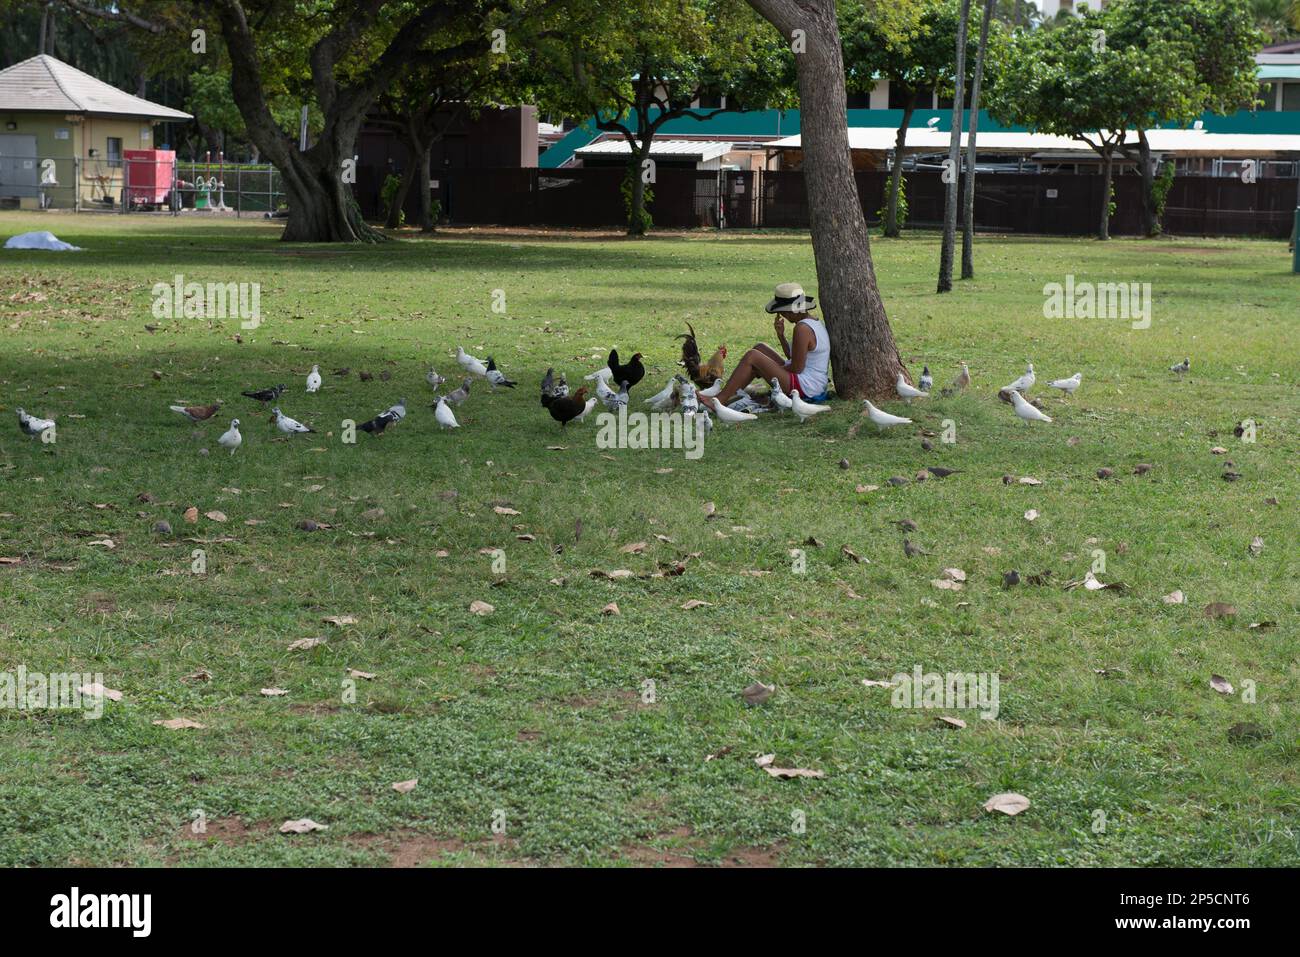 A well meaning woman in Kapiolani Beach Park, Honolulu, Oahu, Hawaii takes a break from feeding the many non-native, invasive birds in the park. Stock Photo